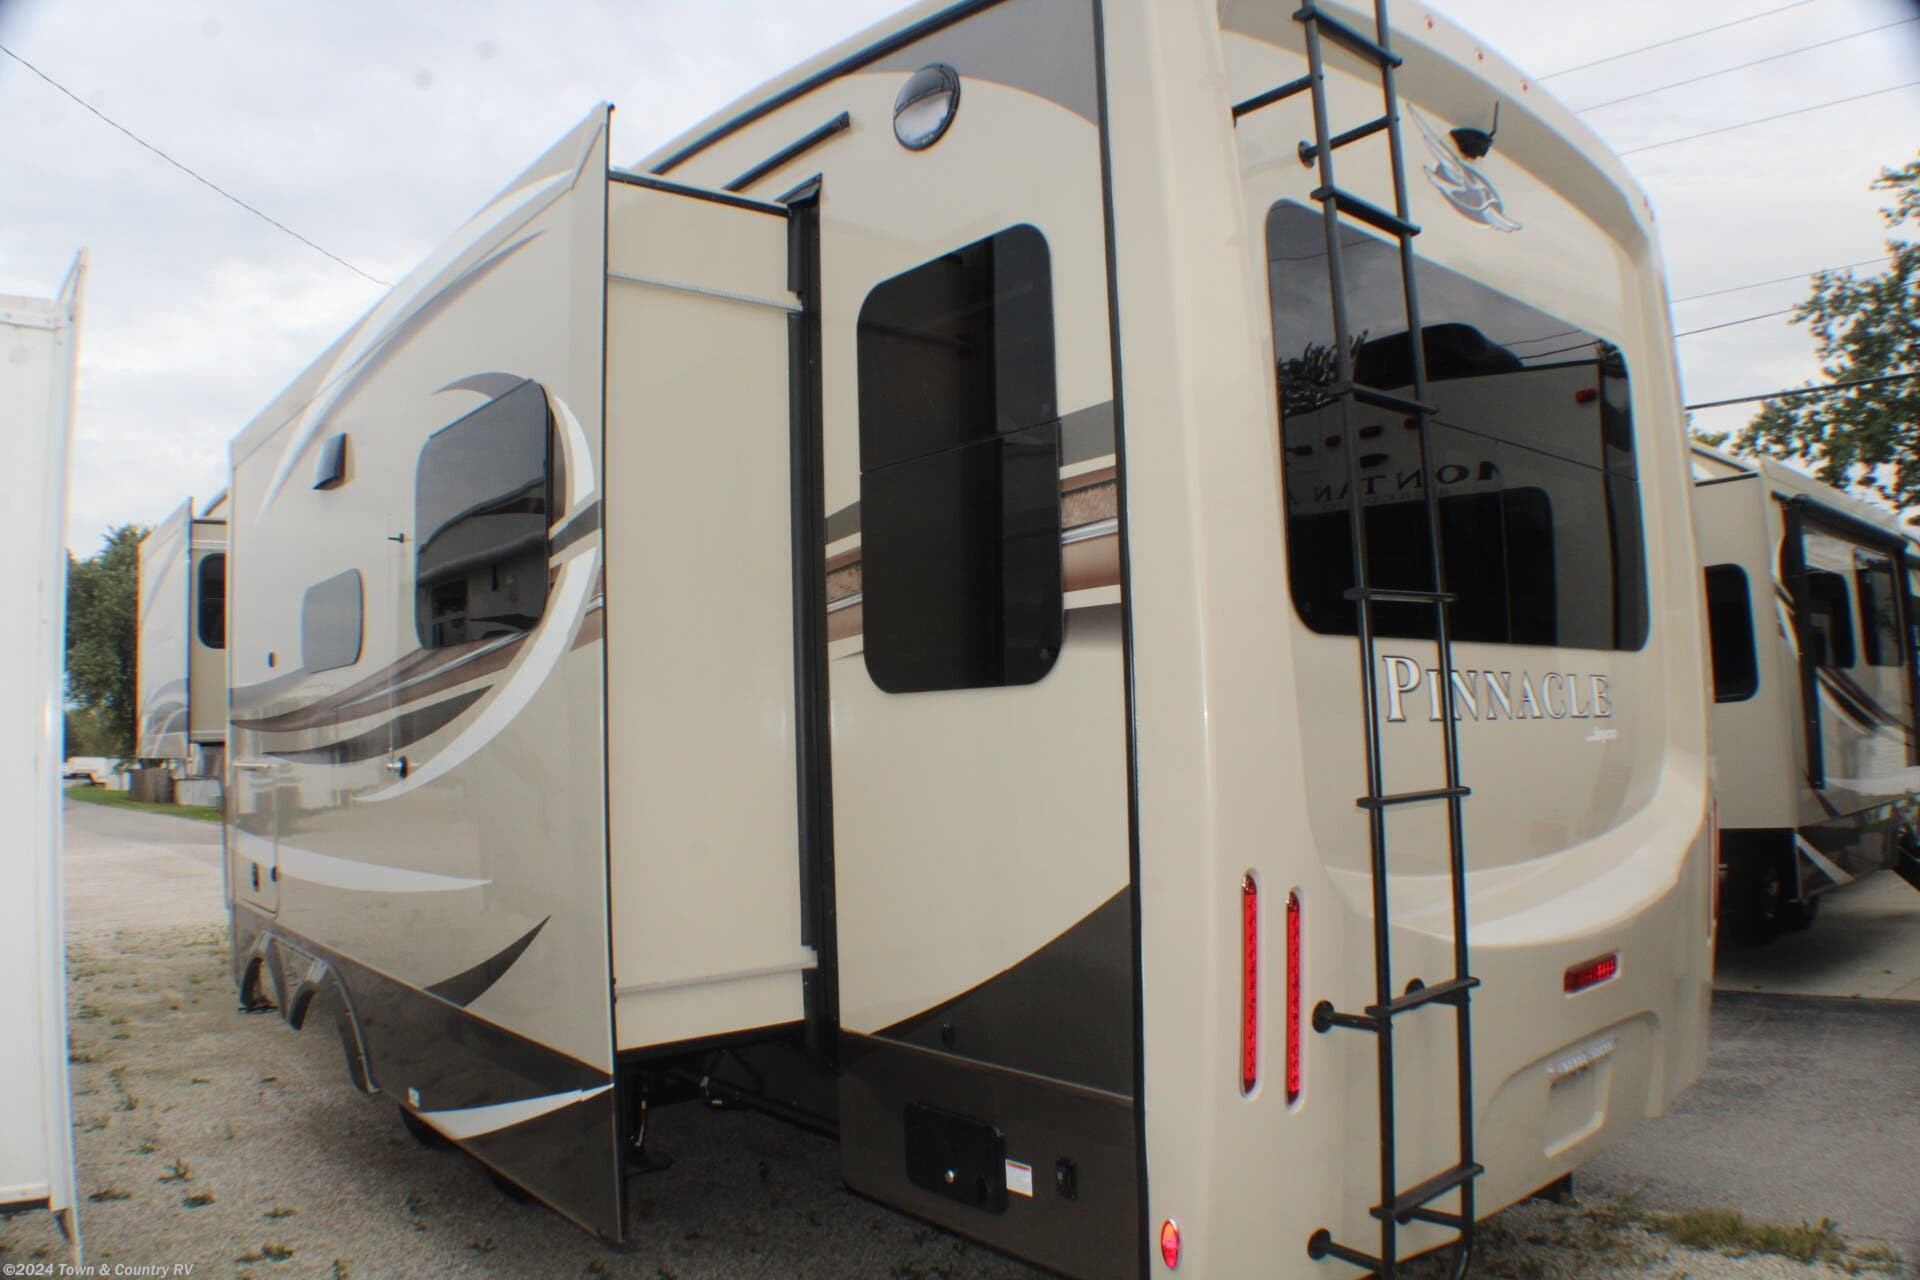 2020 Jayco RV Pinnacle 32RLTS for Sale in Clyde, OH 43410 | 3727 2020 Jayco Pinnacle 32rlts For Sale